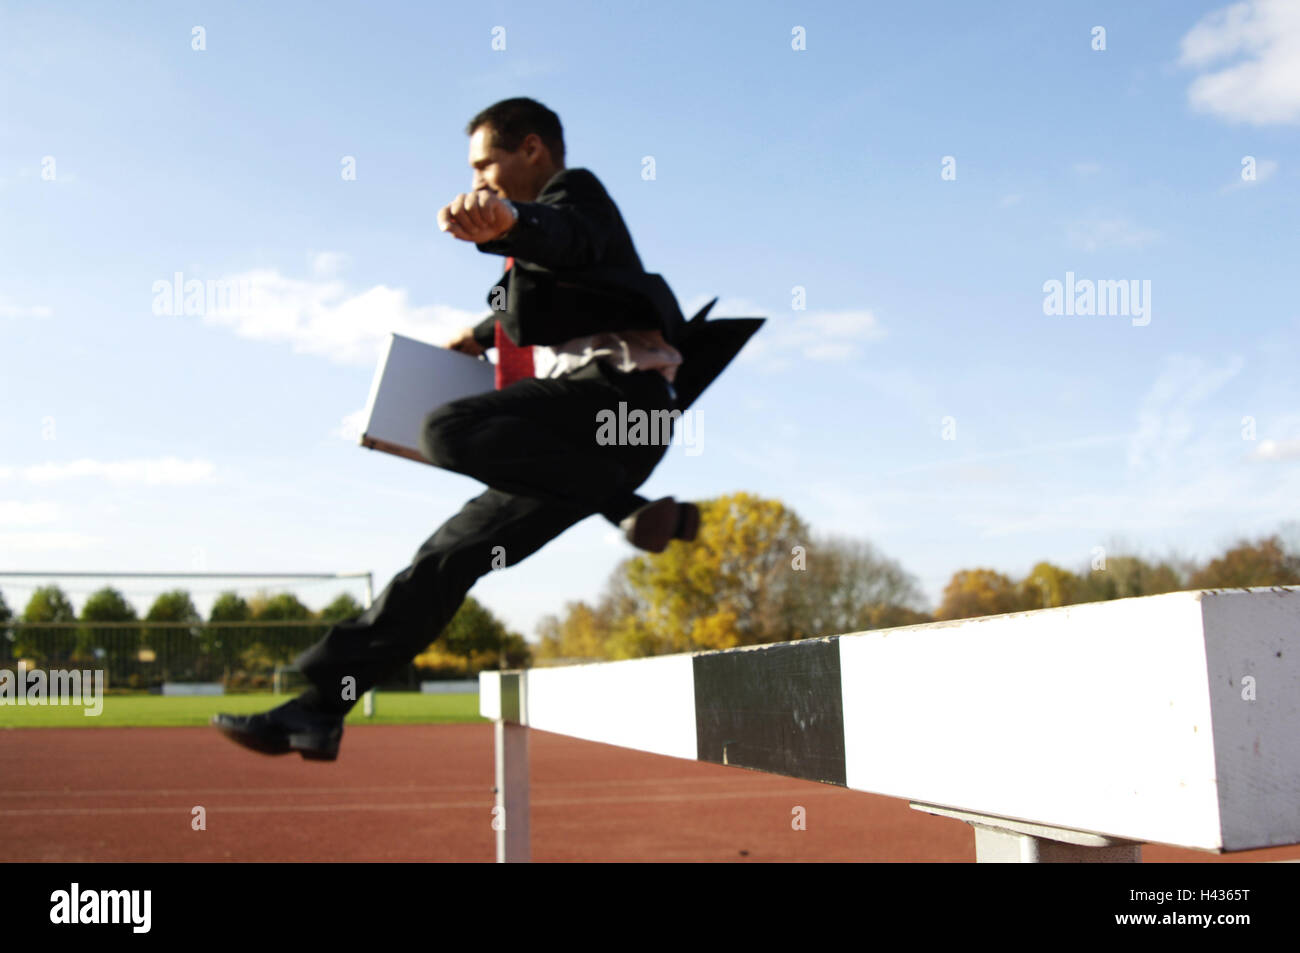 Businessman, Tartanbahn, hurdle, crack, perseverance, motivation, Dynamically, smile, sprint, suit, sport, business, icon, career, occupation, career, success, readiness, motivation, ambition, energy, motion, briefcase, suitcase, Purposefully, capacity, c Stock Photo